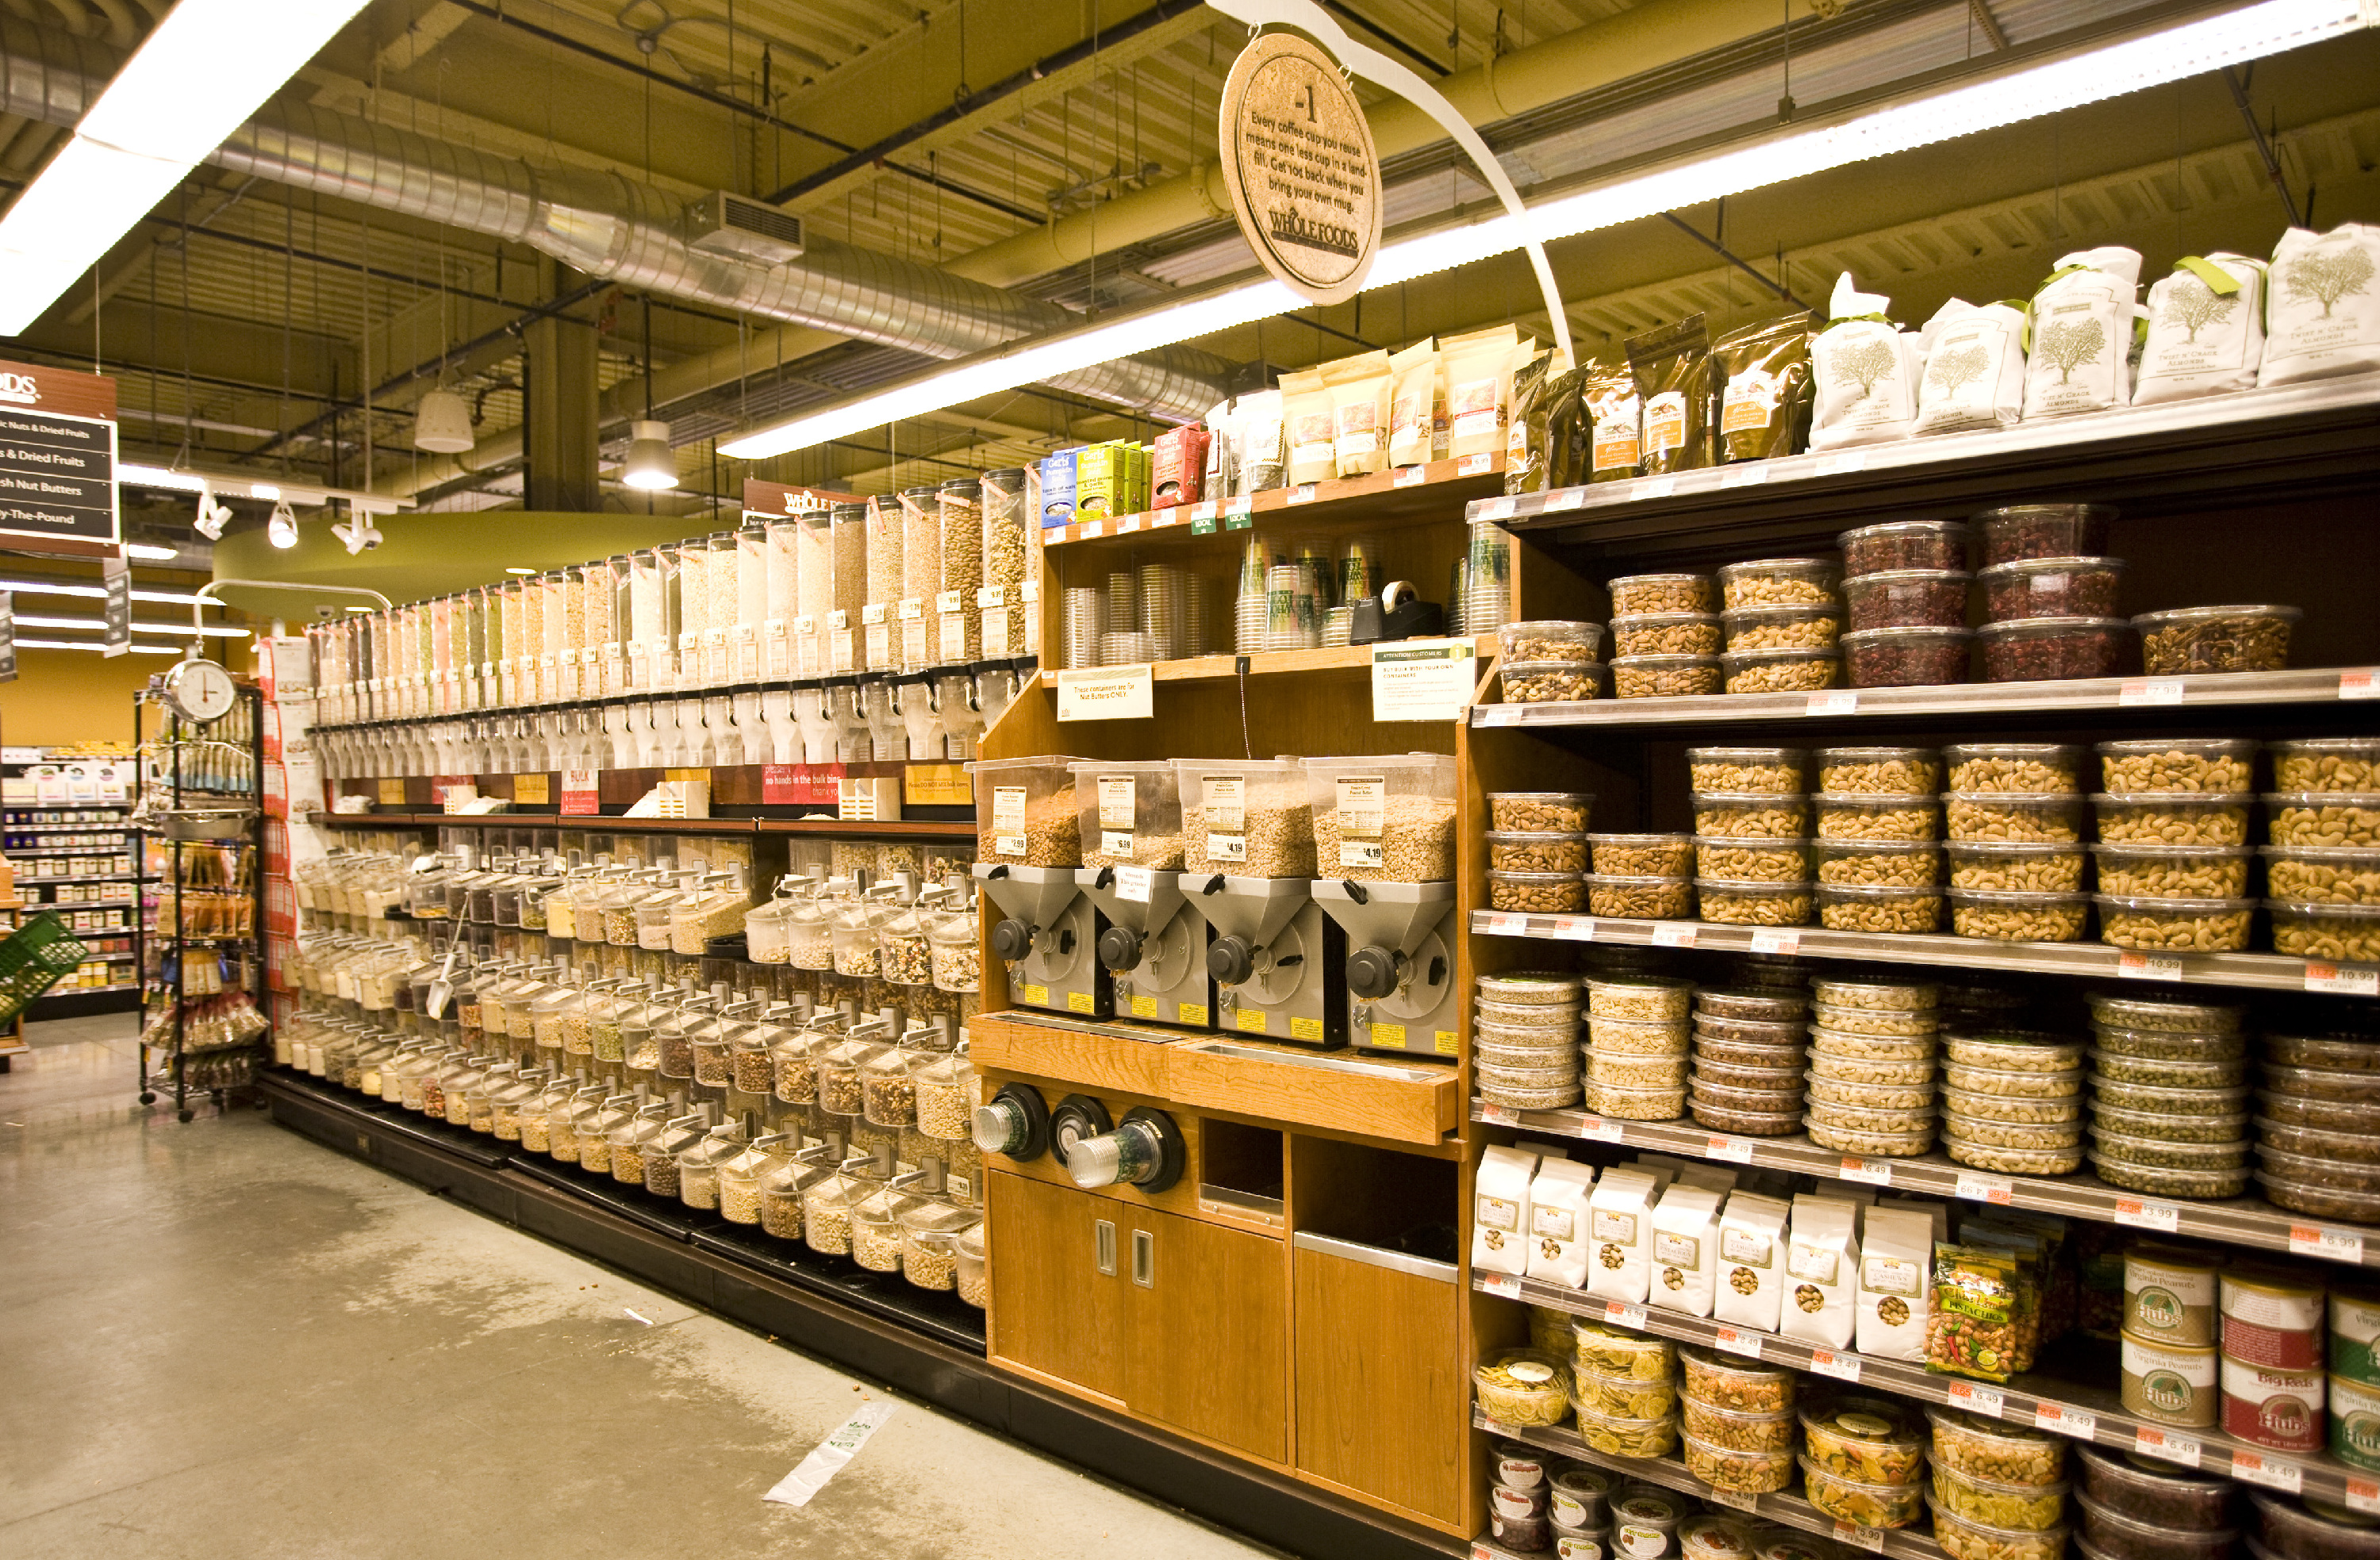 Buy Haven's Kitchen Products at Whole Foods Market